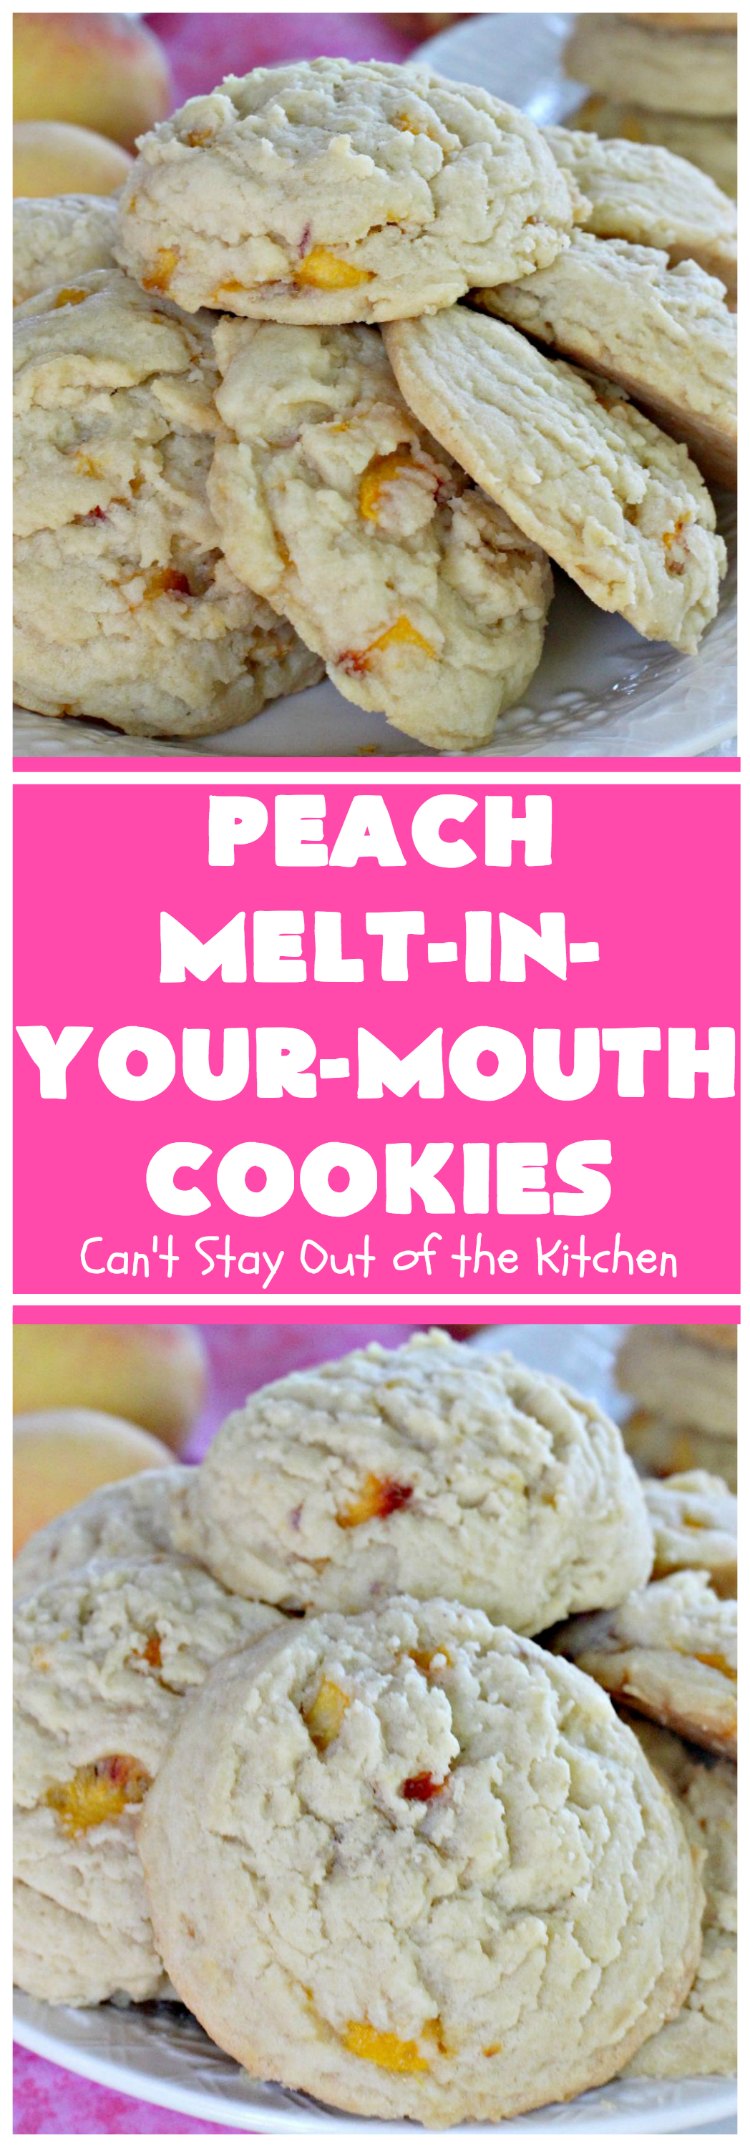 Peach Melt-In-Your-Mouth Cookies | Can't Stay Out of the Kitchen